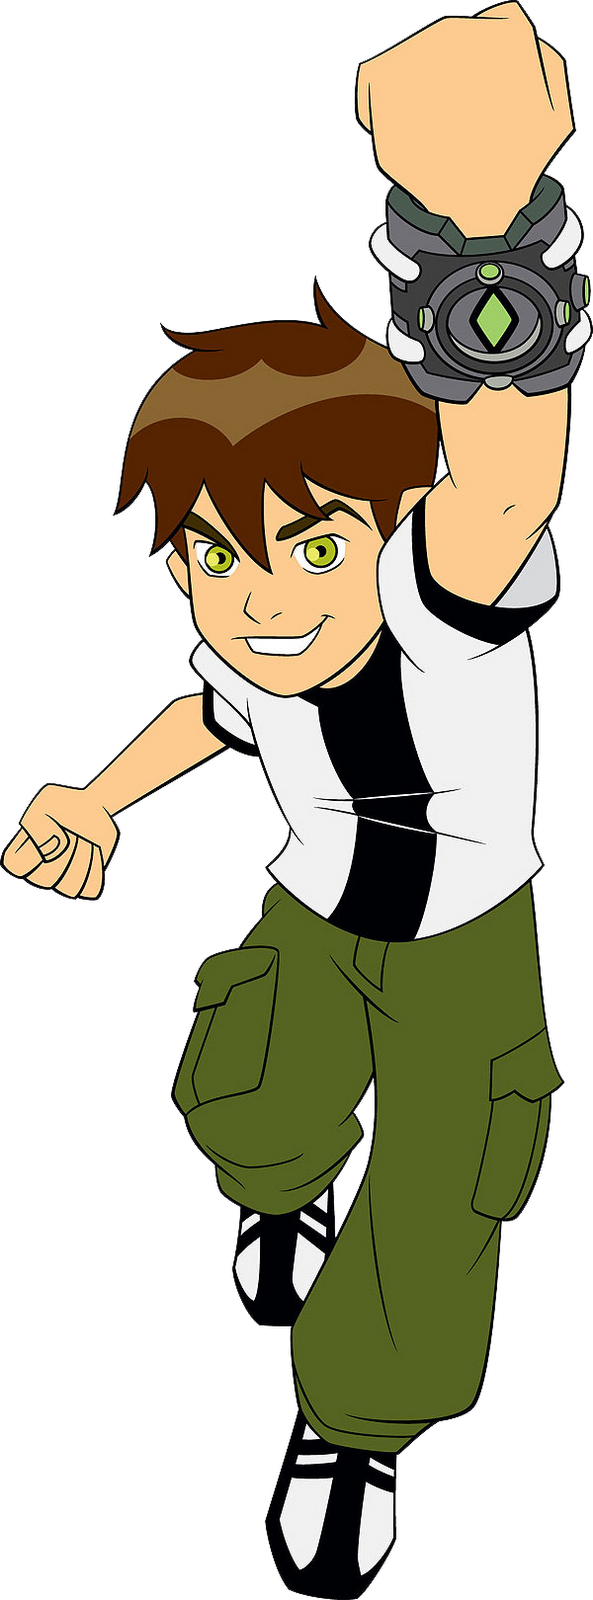 0 Result Images of Ben 10 Omniverse Ben 10 Png - PNG Image Collection